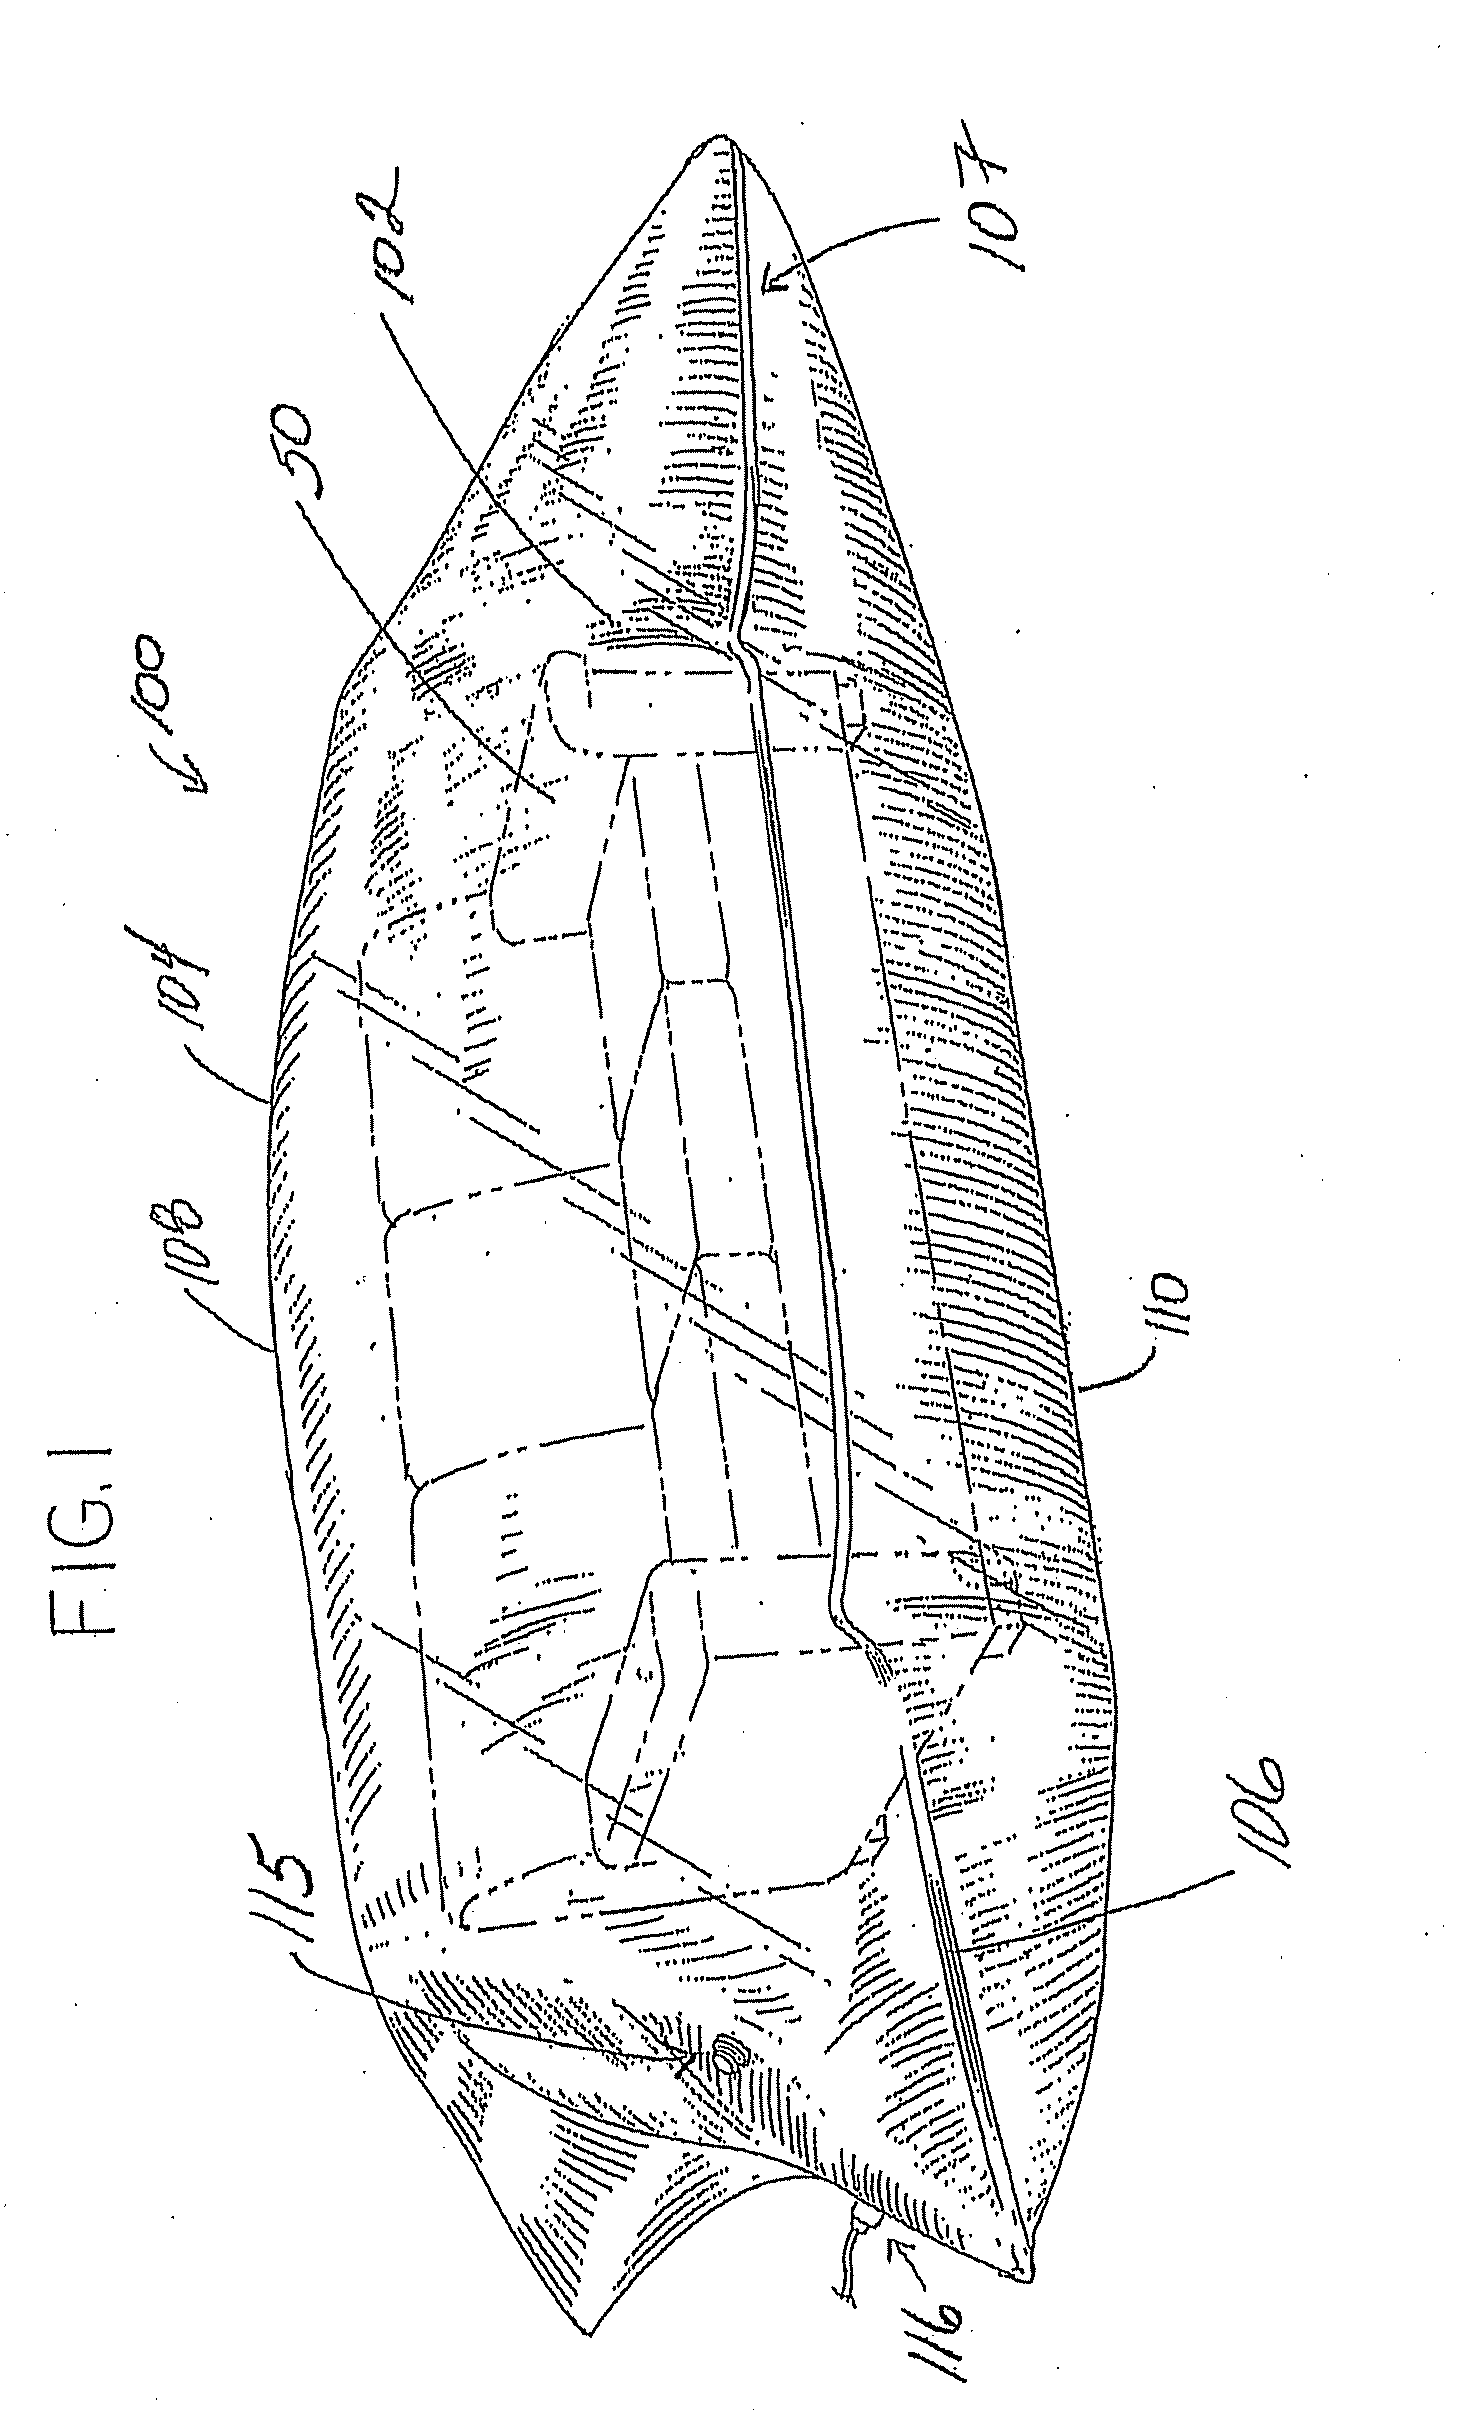 Inflatable portable treatment device